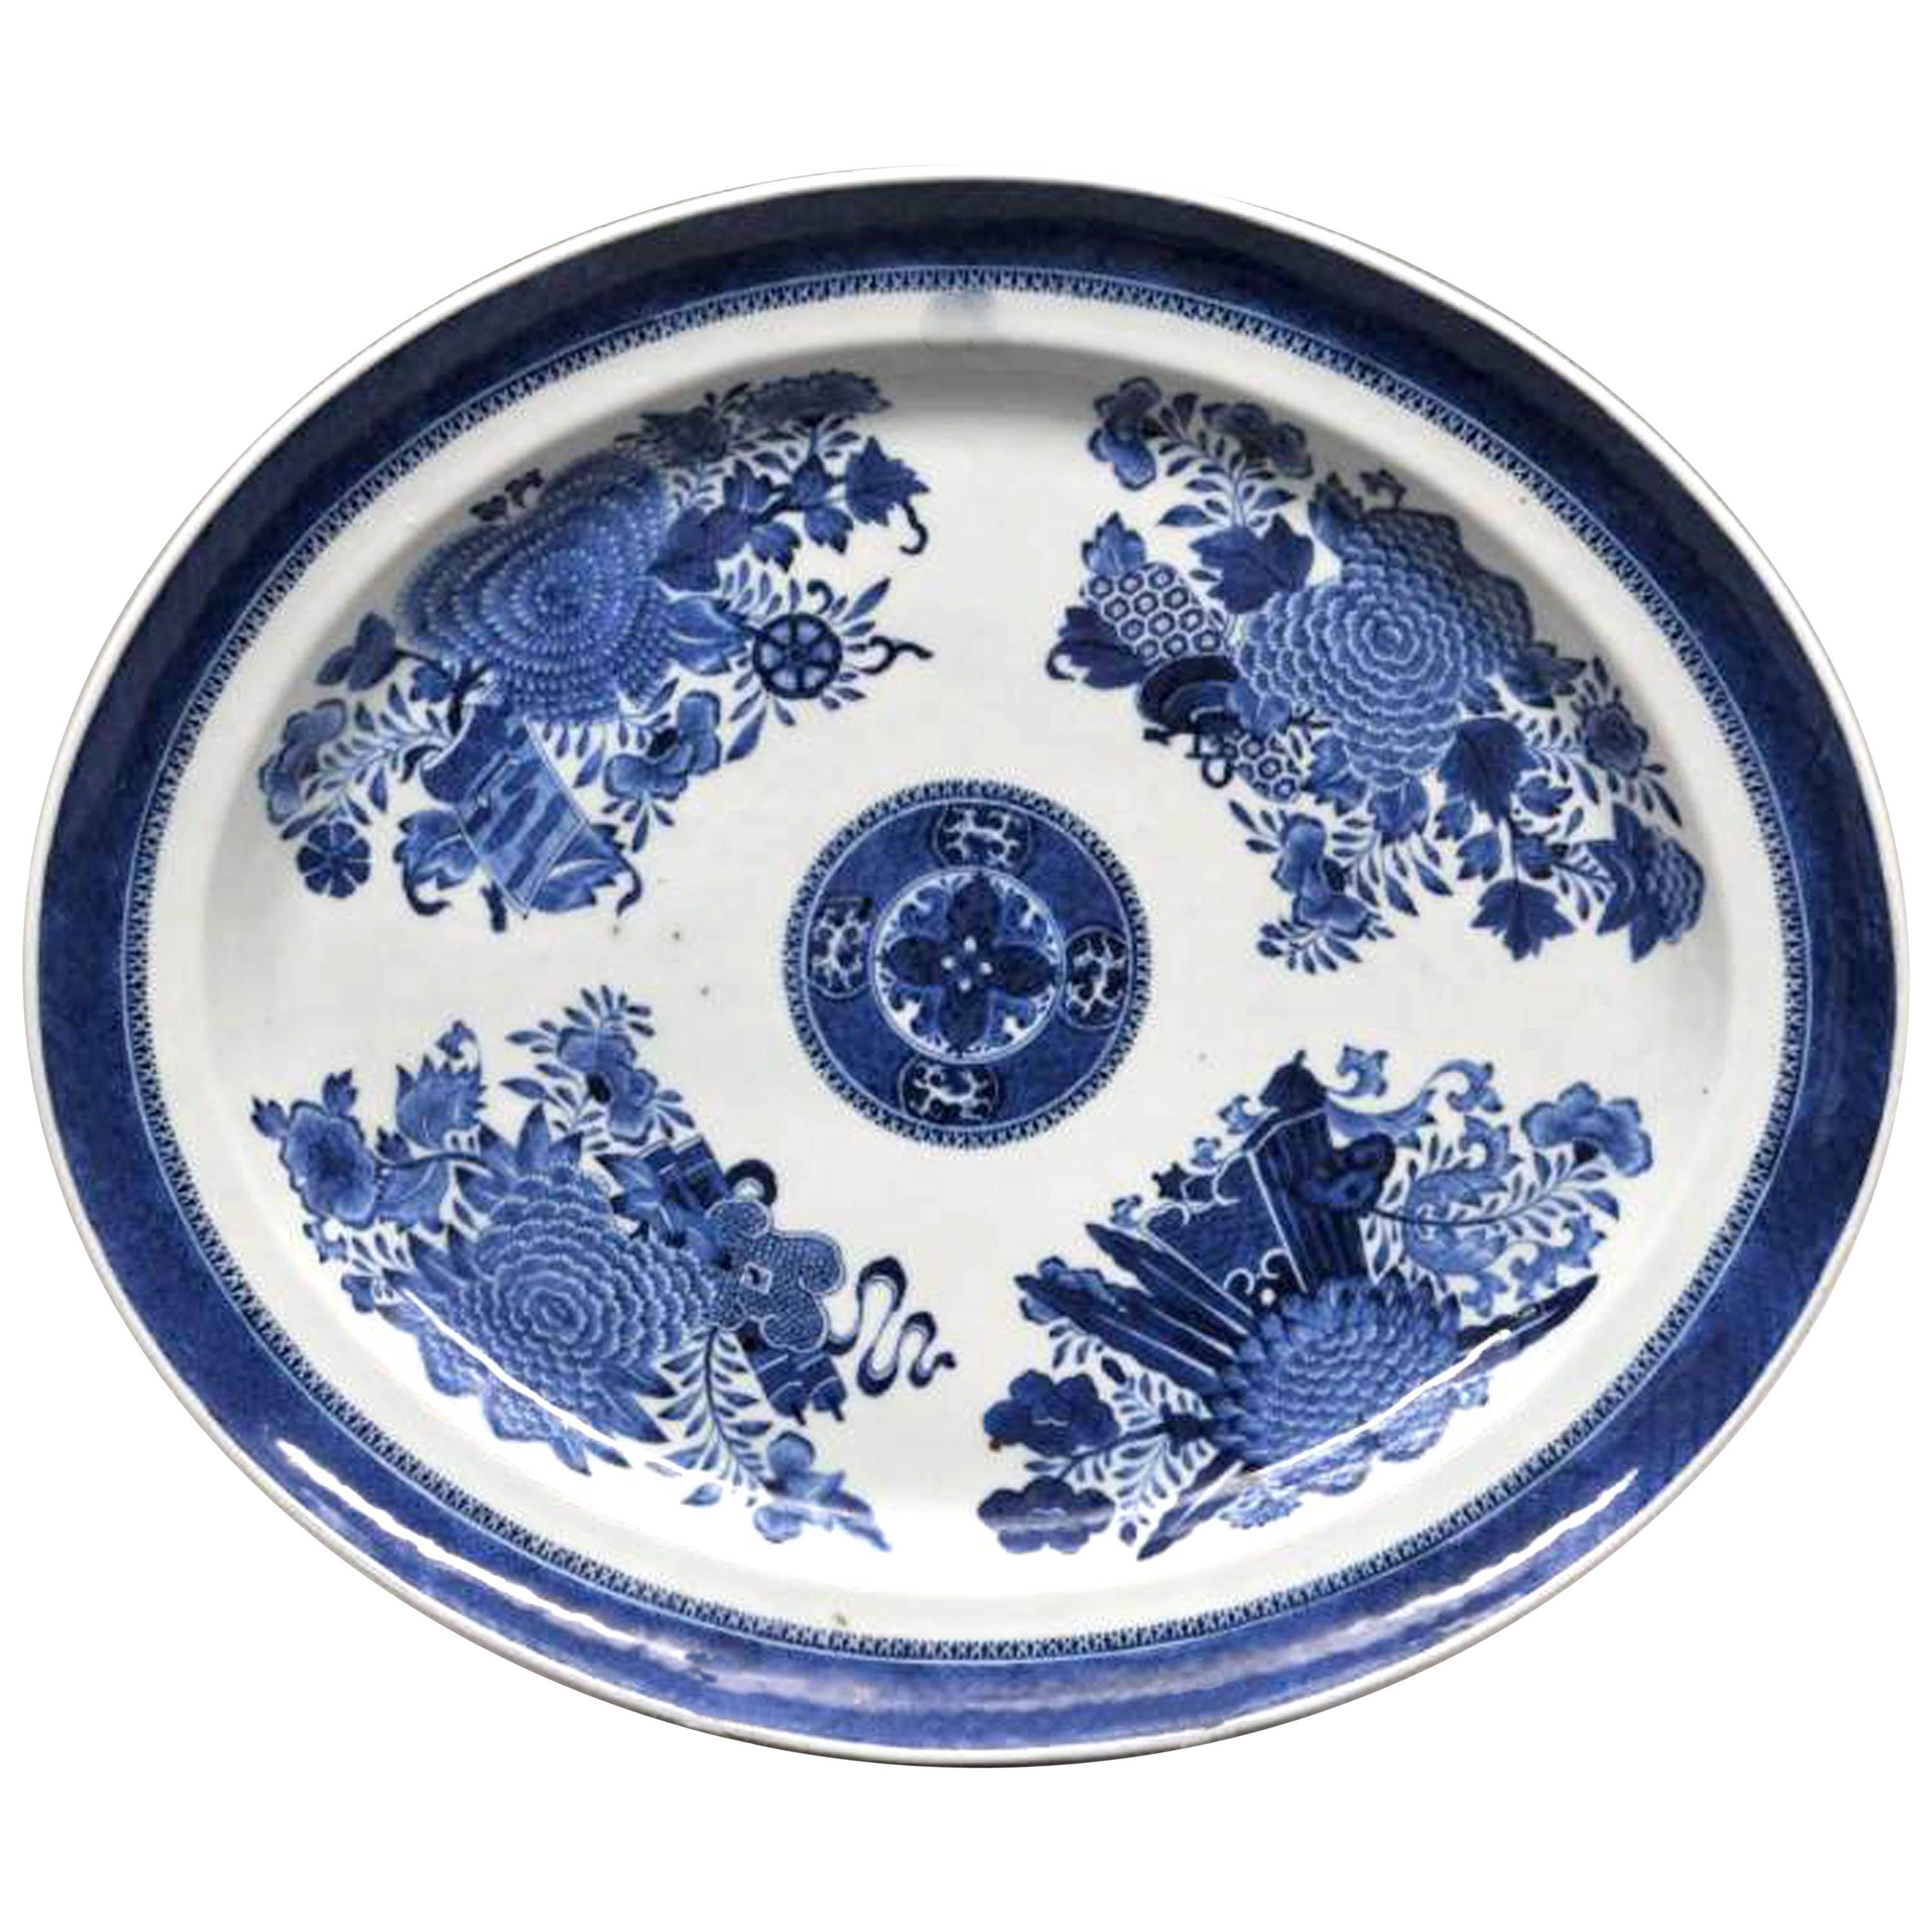 Chinese Export Porcelain Large Blue and White Fitzhugh Dish, circa 1790